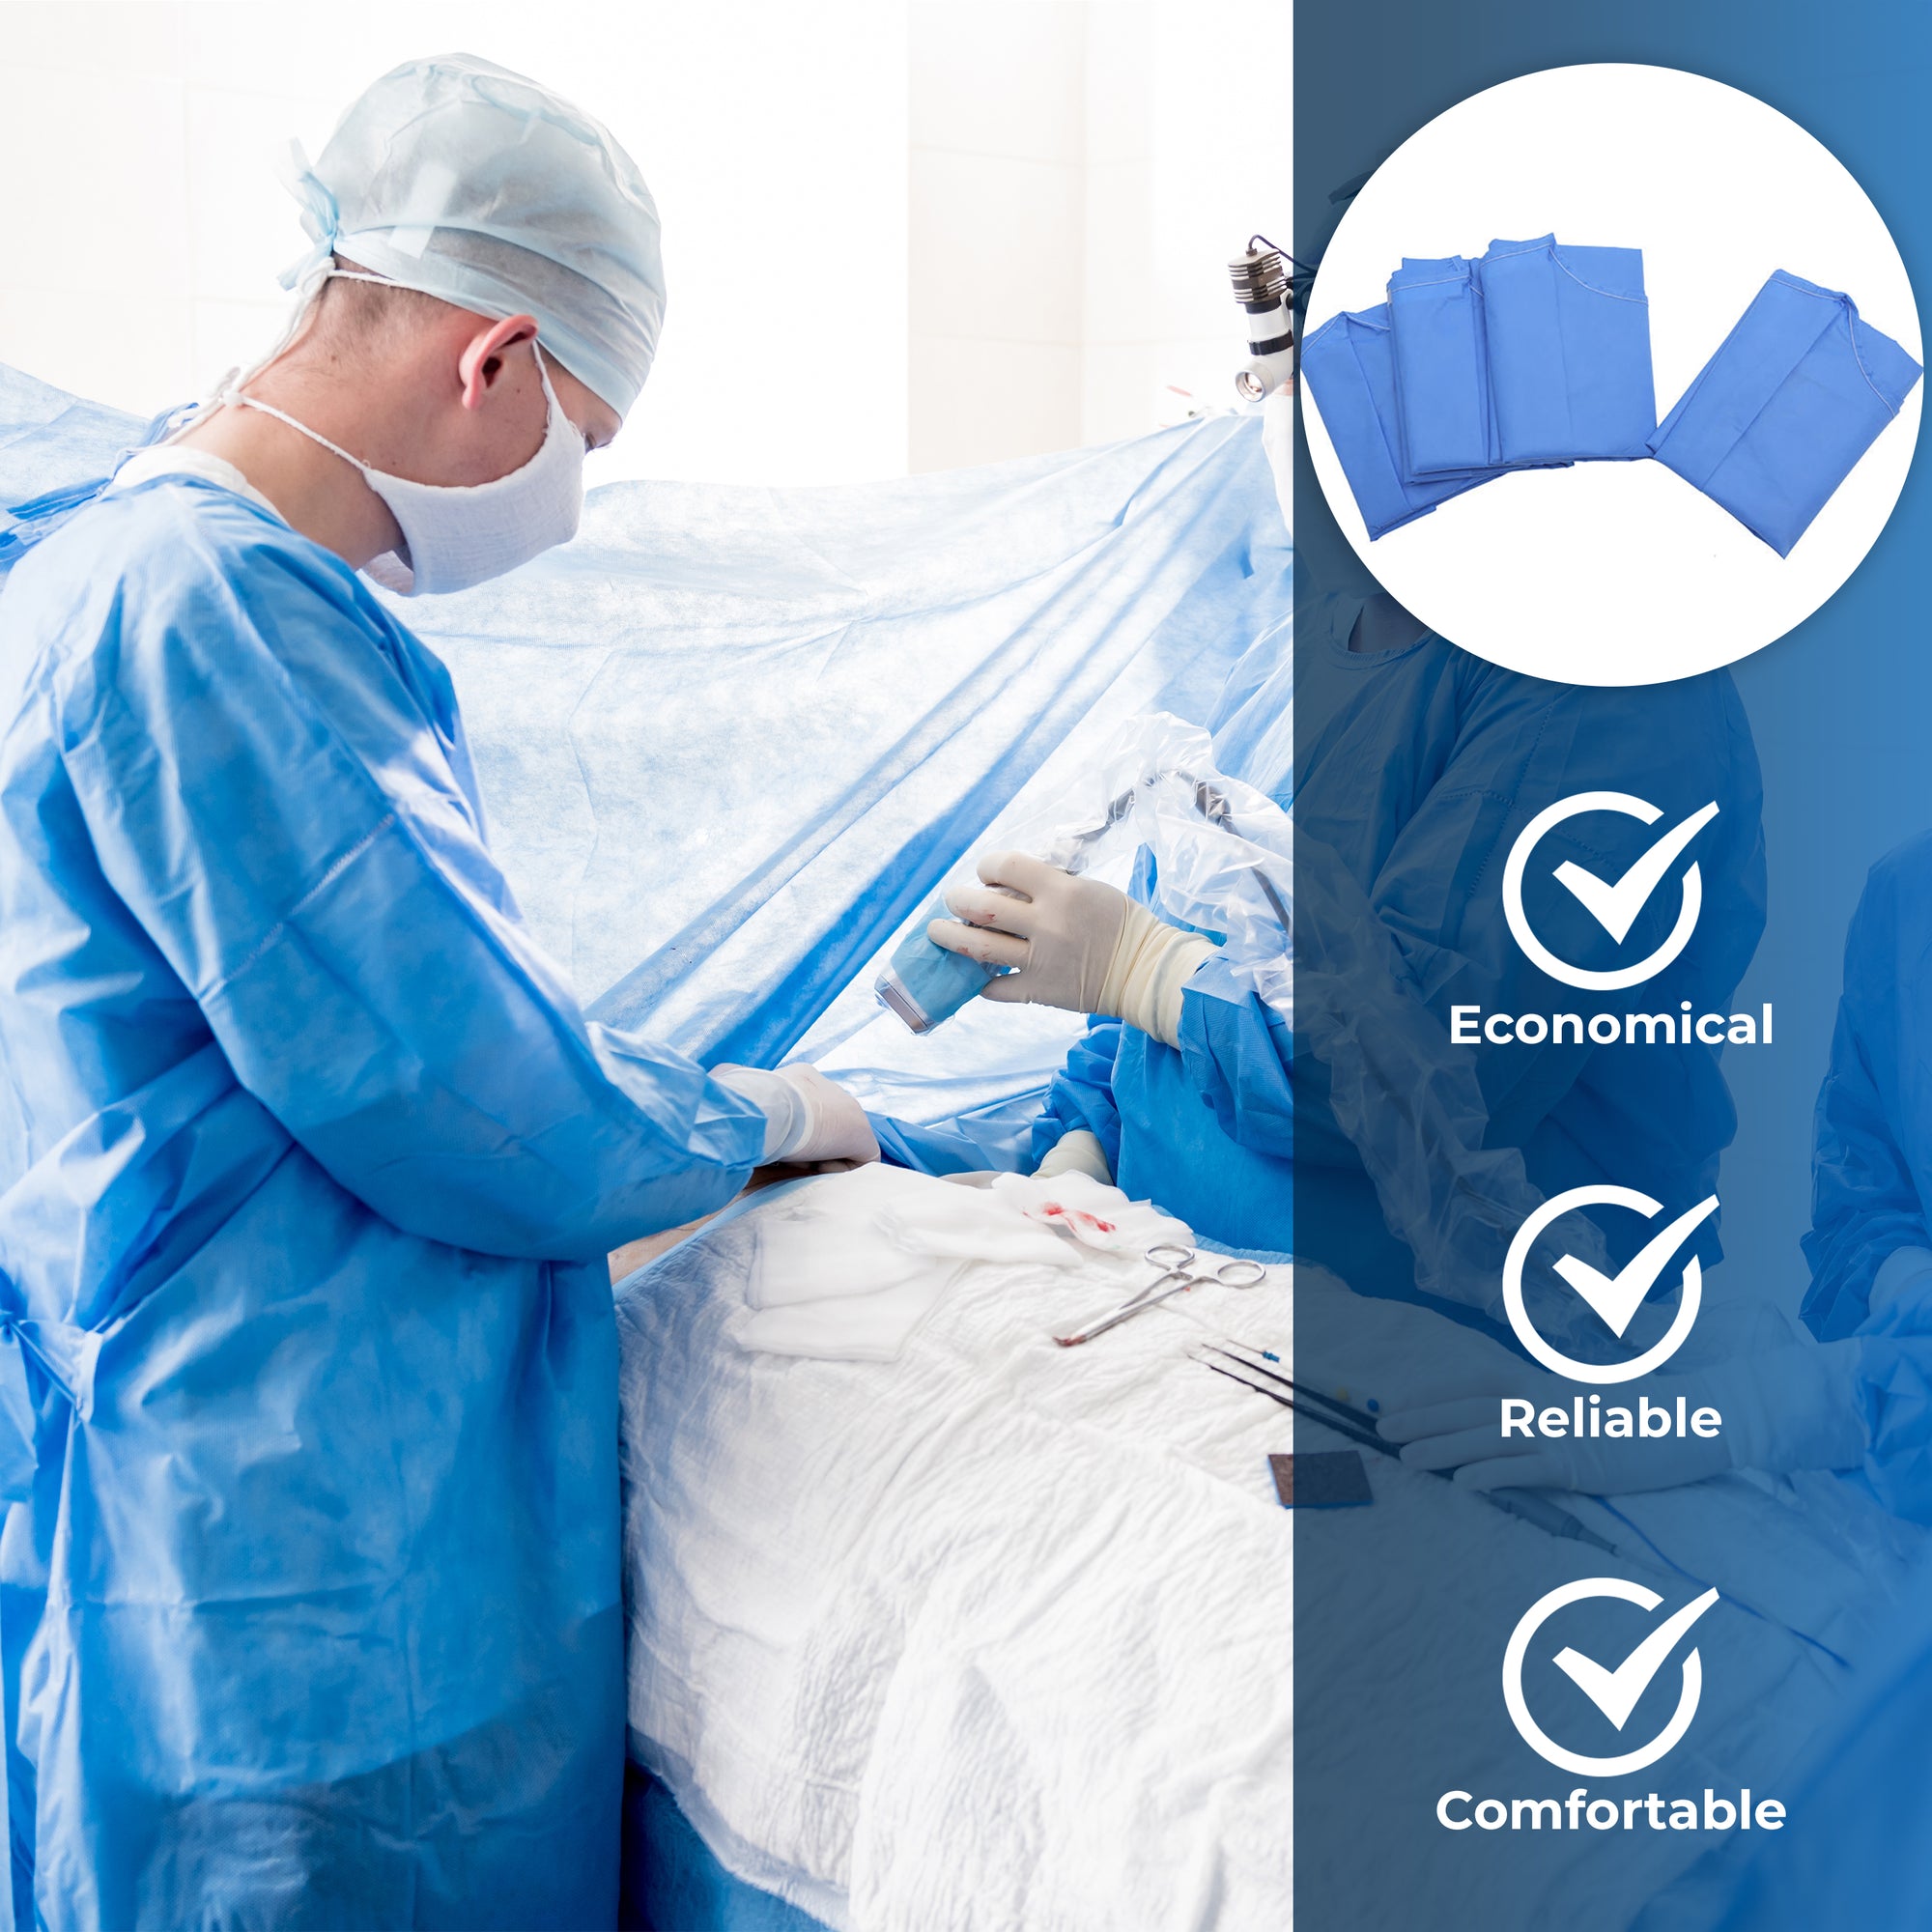 Disposable Isolation Gown with Knitted Cuffs, CE Certified Level 2 Gowns, 100% Polypropylene, Fluid Resistant, Unisex, Fully Closed with Double Ties